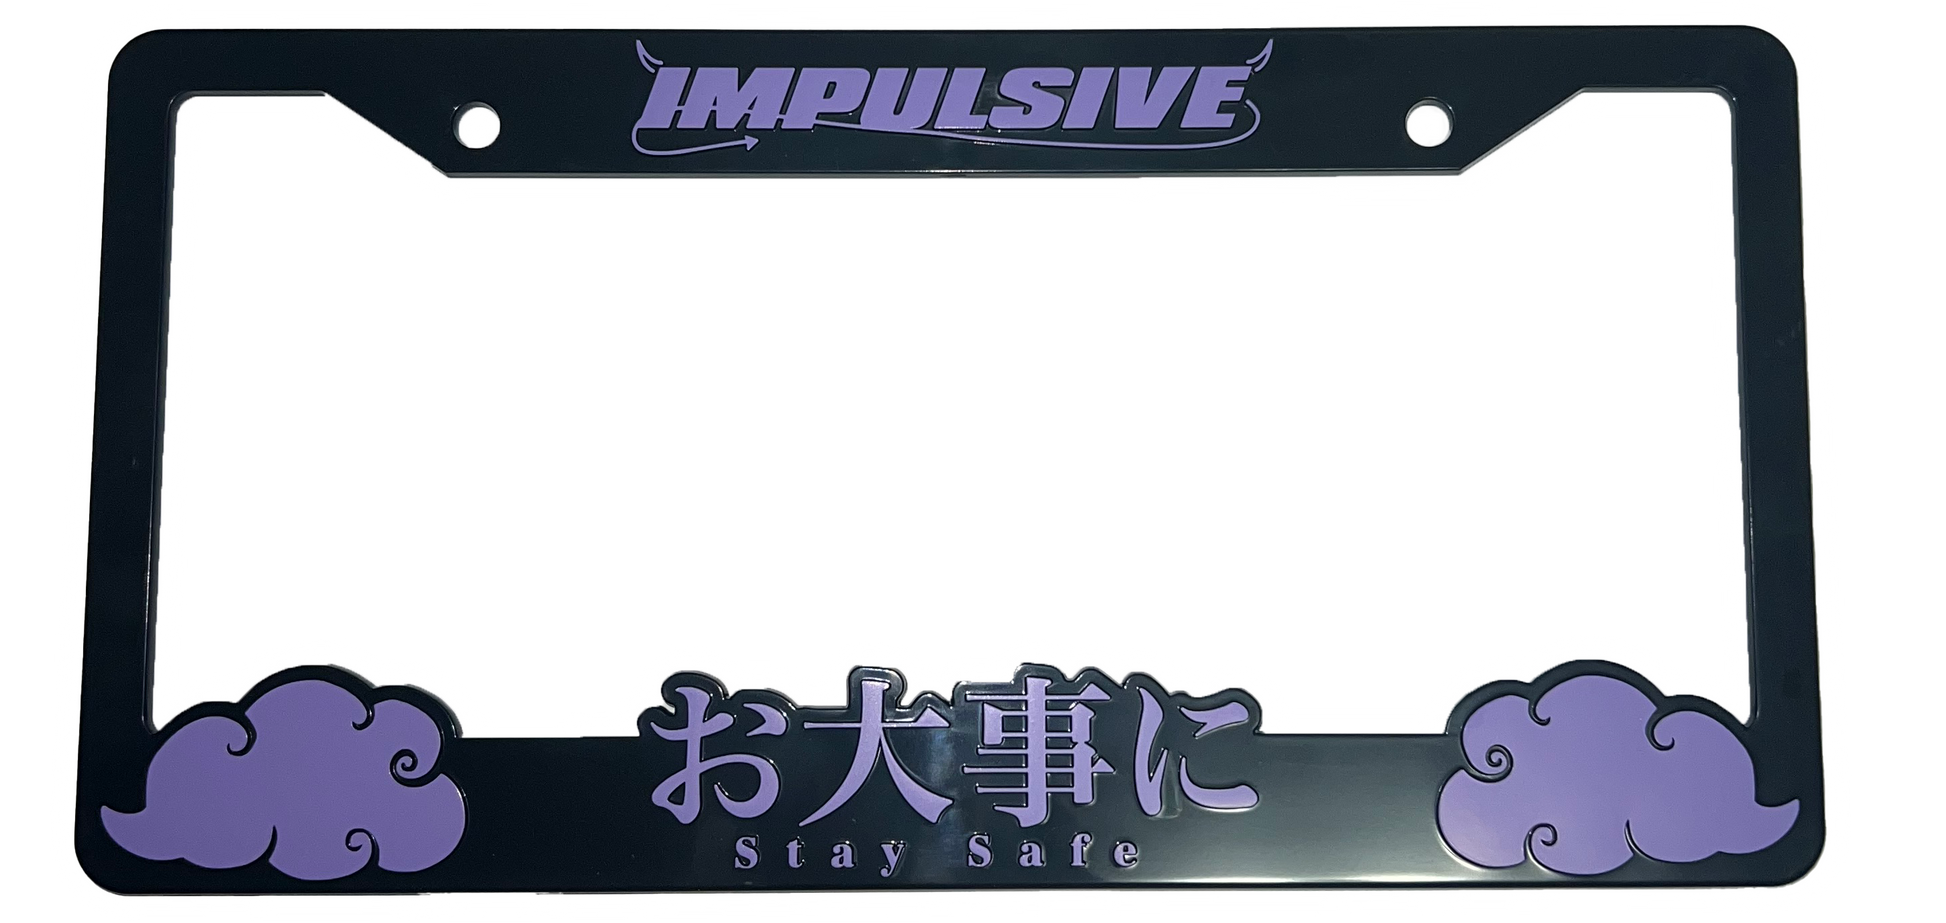 Japanese anime inspired plastic custom License Plate Frame. Top has Impulsive logo and the bottom has japanese characters and english translated to stay safe surrounding with japanese clouds. Asian inspired. Black Frame with purple lettering.